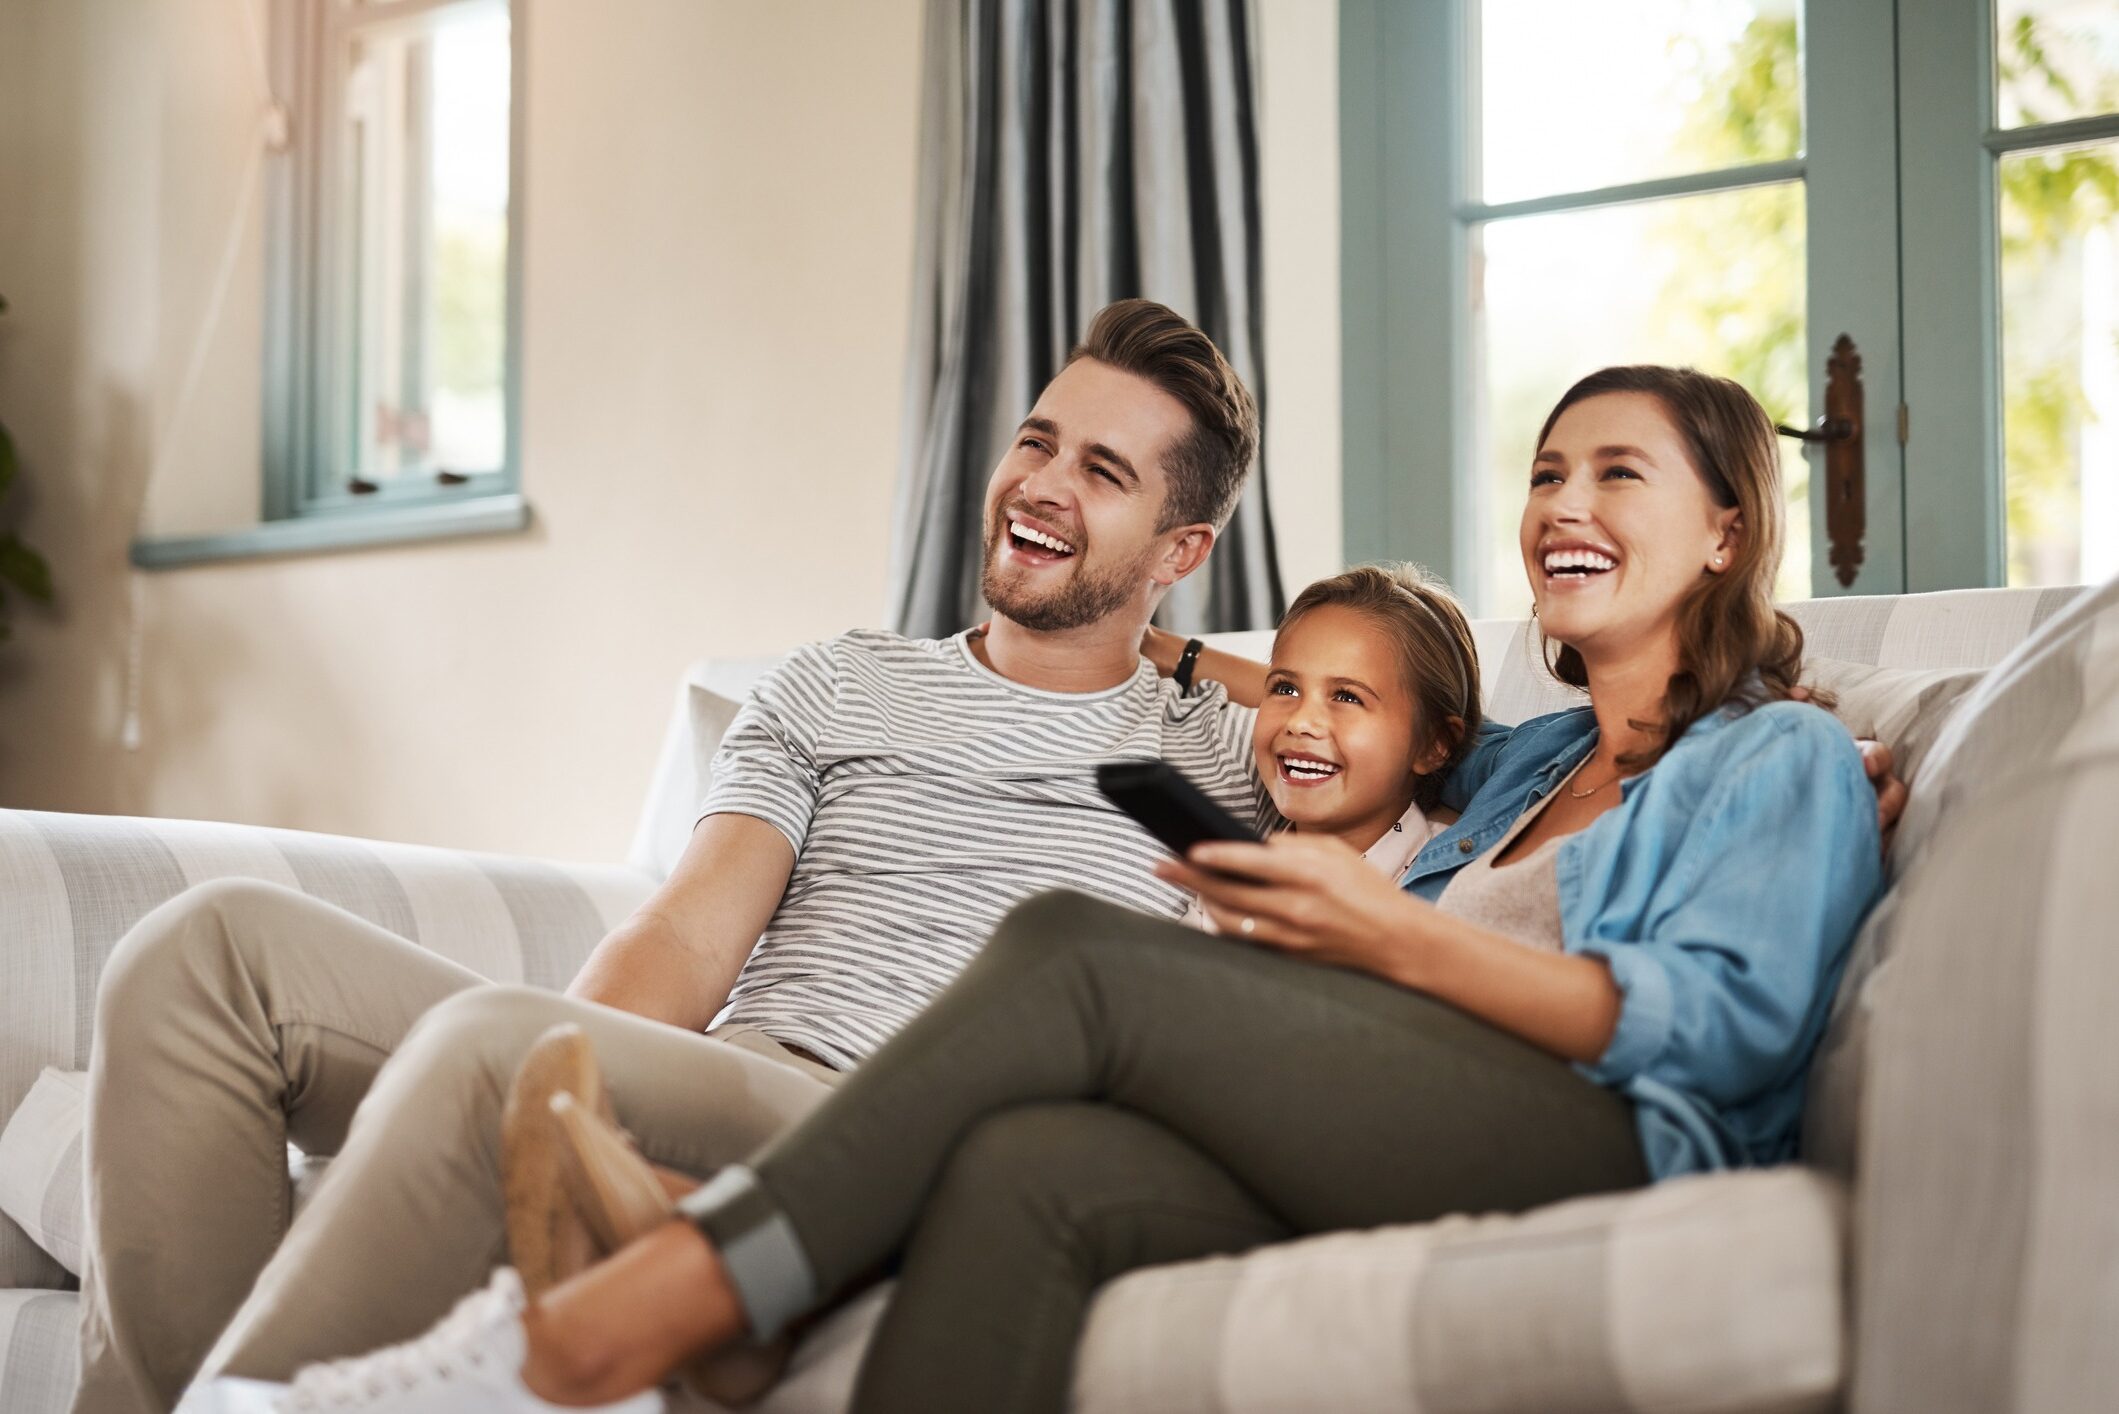 Two adults and a child are sitting on a sofa, smiling and laughing together. One person is holding a remote, suggesting they are watching TV.